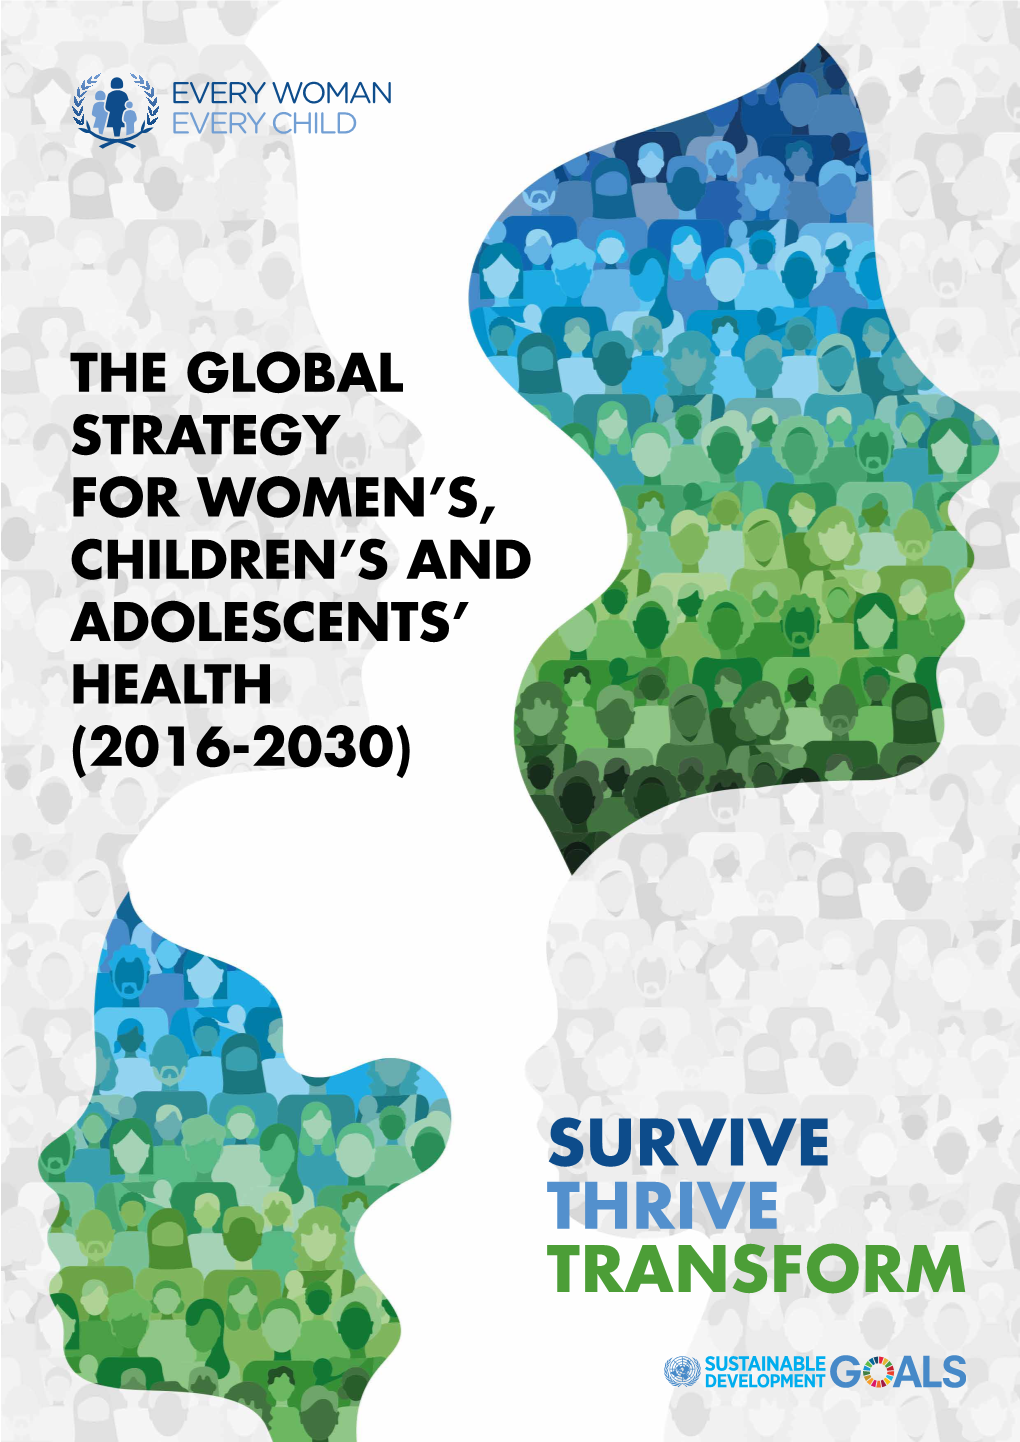 The Global Strategy for Women's, Children's and Adolescents' Health (2016-2030)